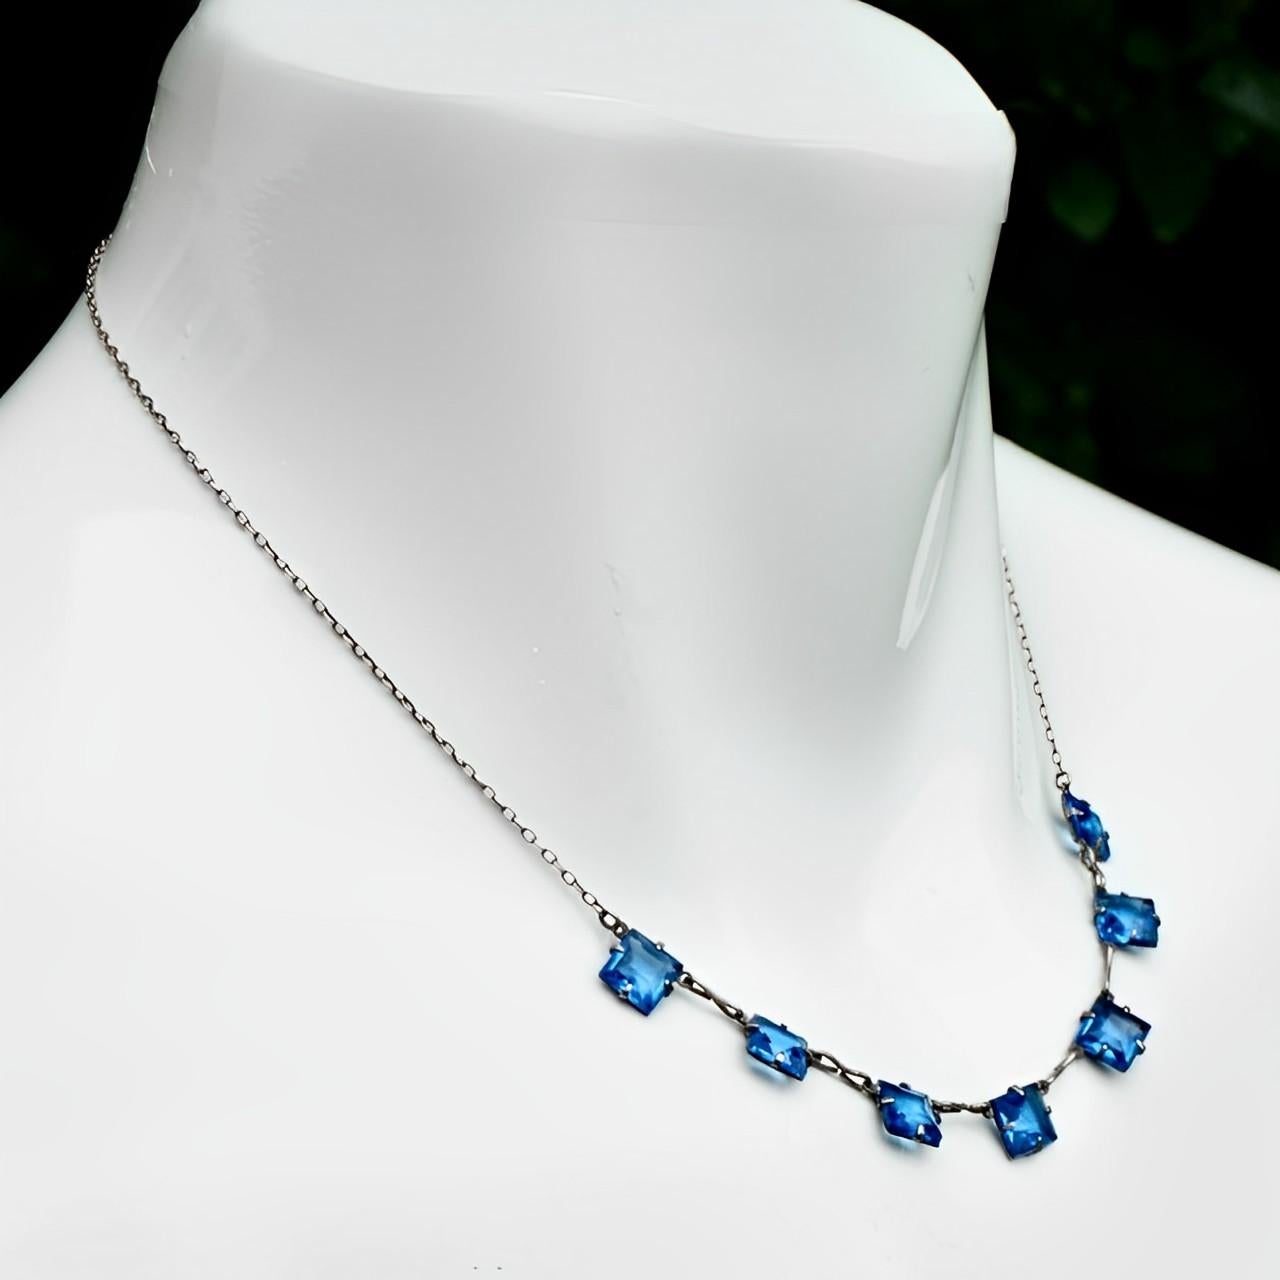 Art Deco Silver Tone Chain Necklace with Square Azure Blue Glass Crystals For Sale 1